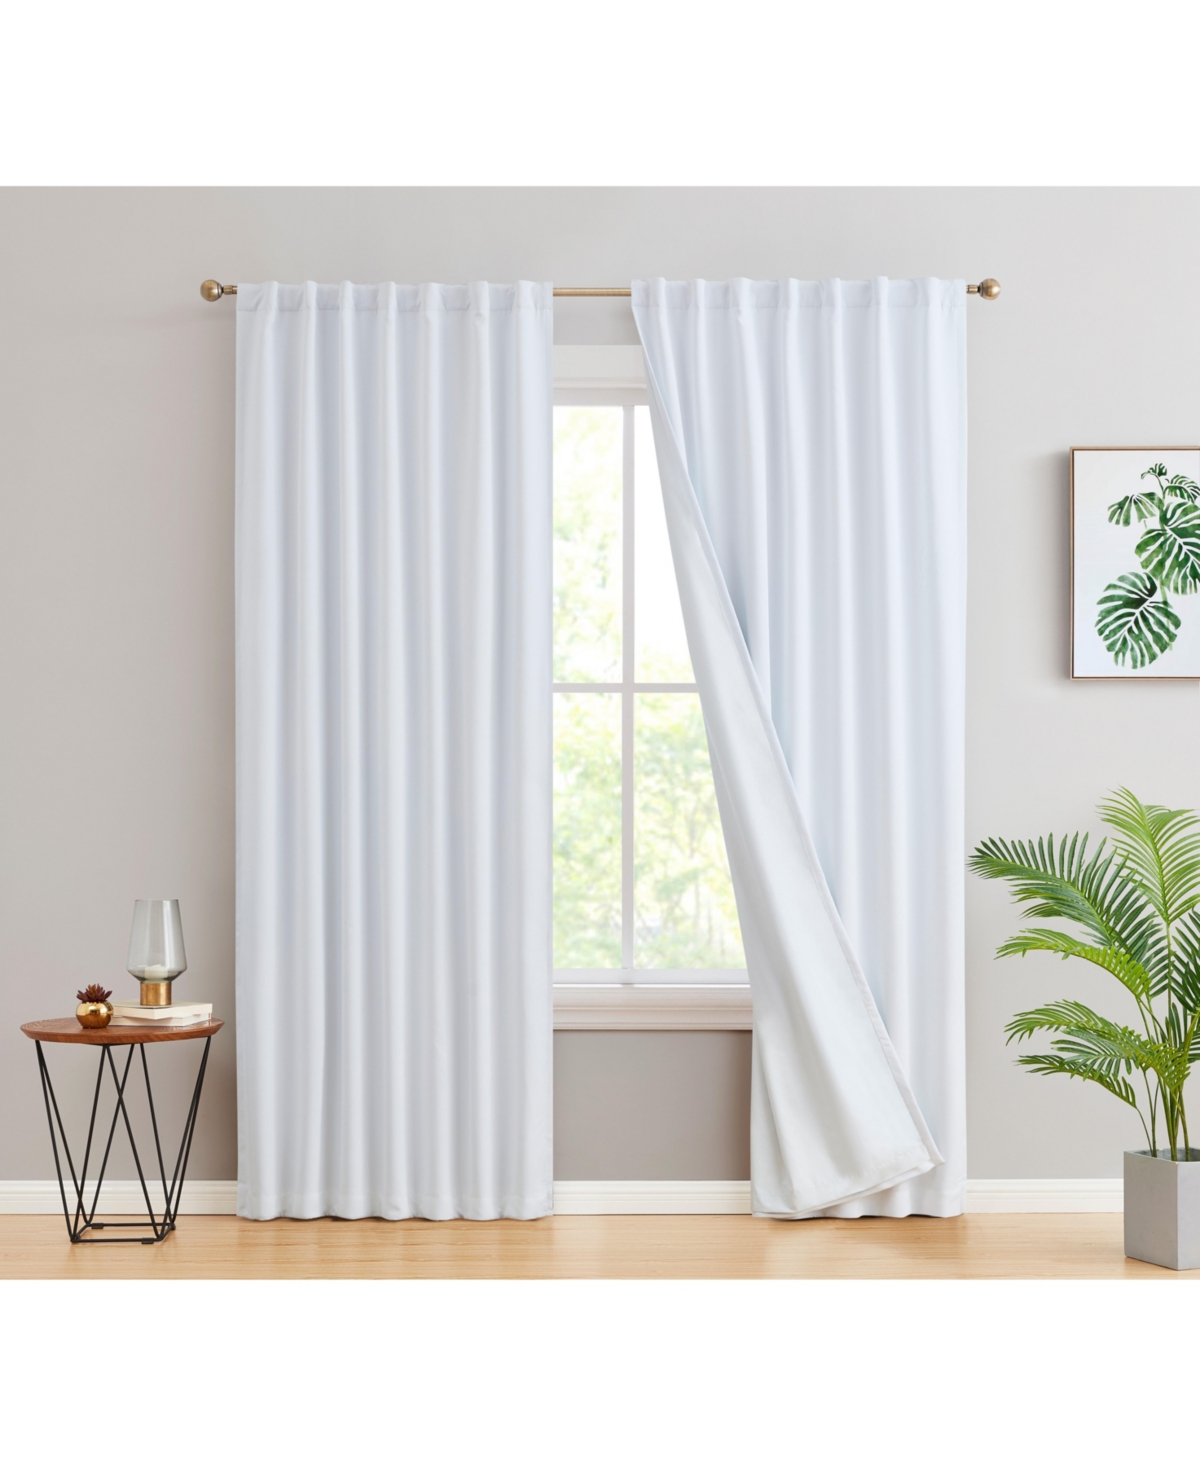 Hamilton 100% Complete Blackout Lined Drapery with Heavy Double Layer Thermal Insulated Energy Smart Rod Pocket Back Tab Window Curtains for Be